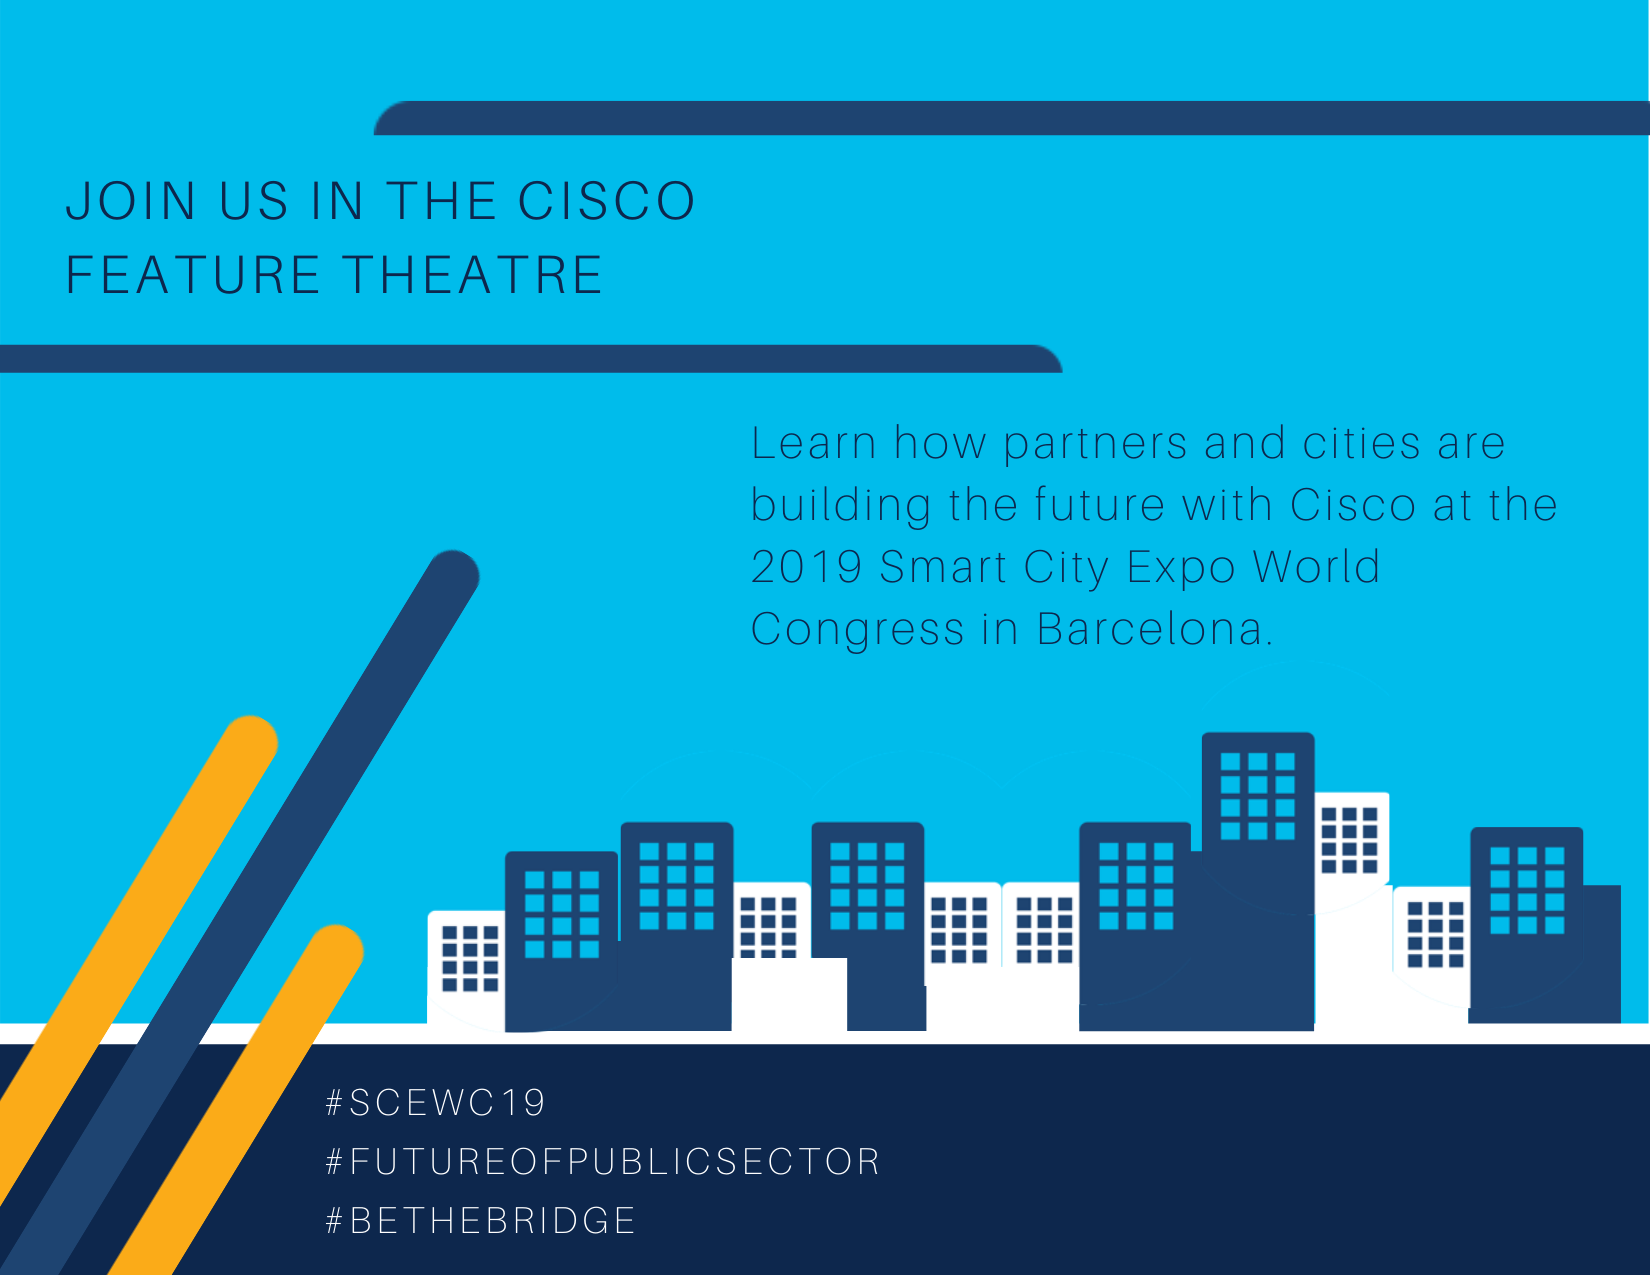 Join Cisco at the Cisco Feature Theatre during Smart City Expo World Congress